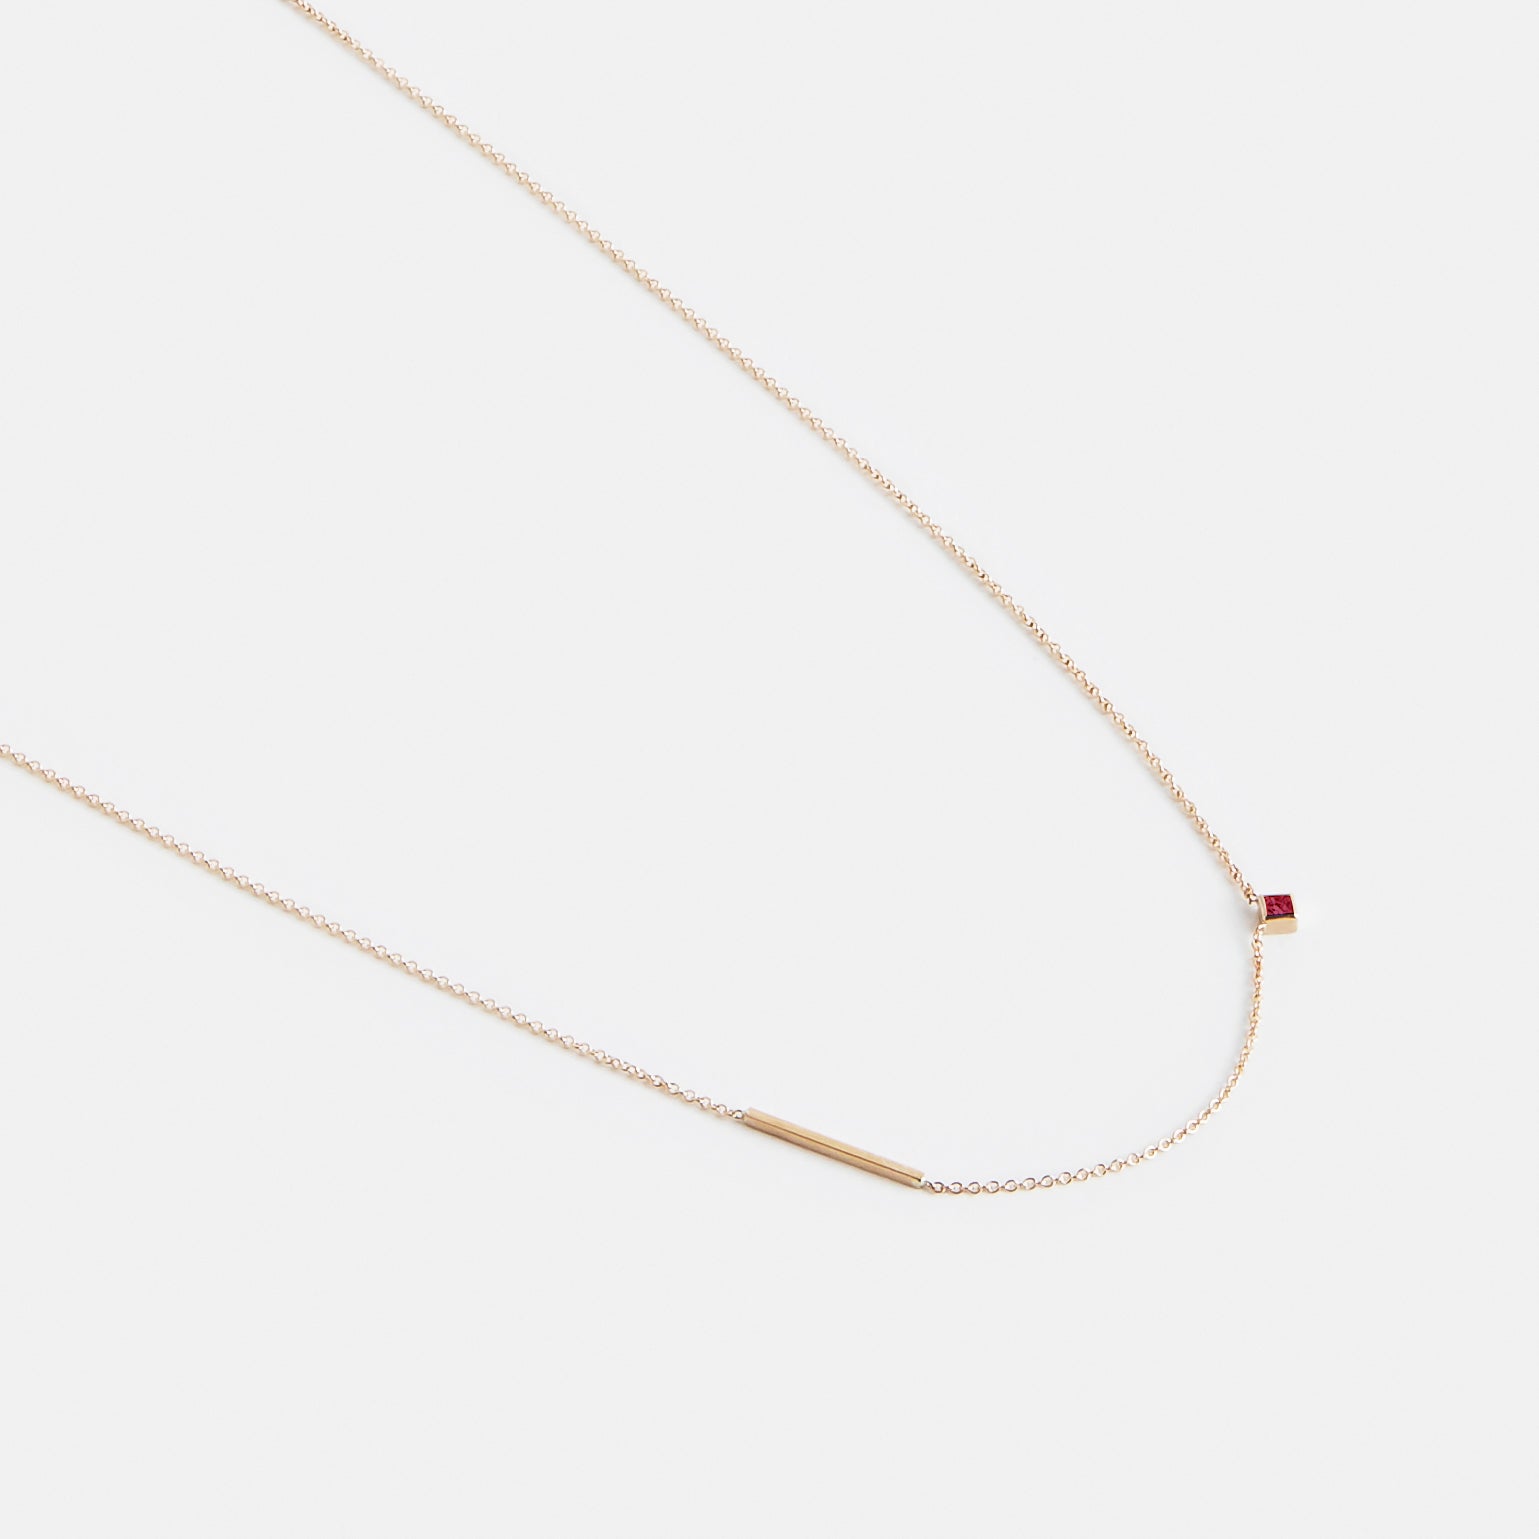 Inu Delicate Necklace in 14k Gold Set with Ruby By SHW Fine Jewelry NYC